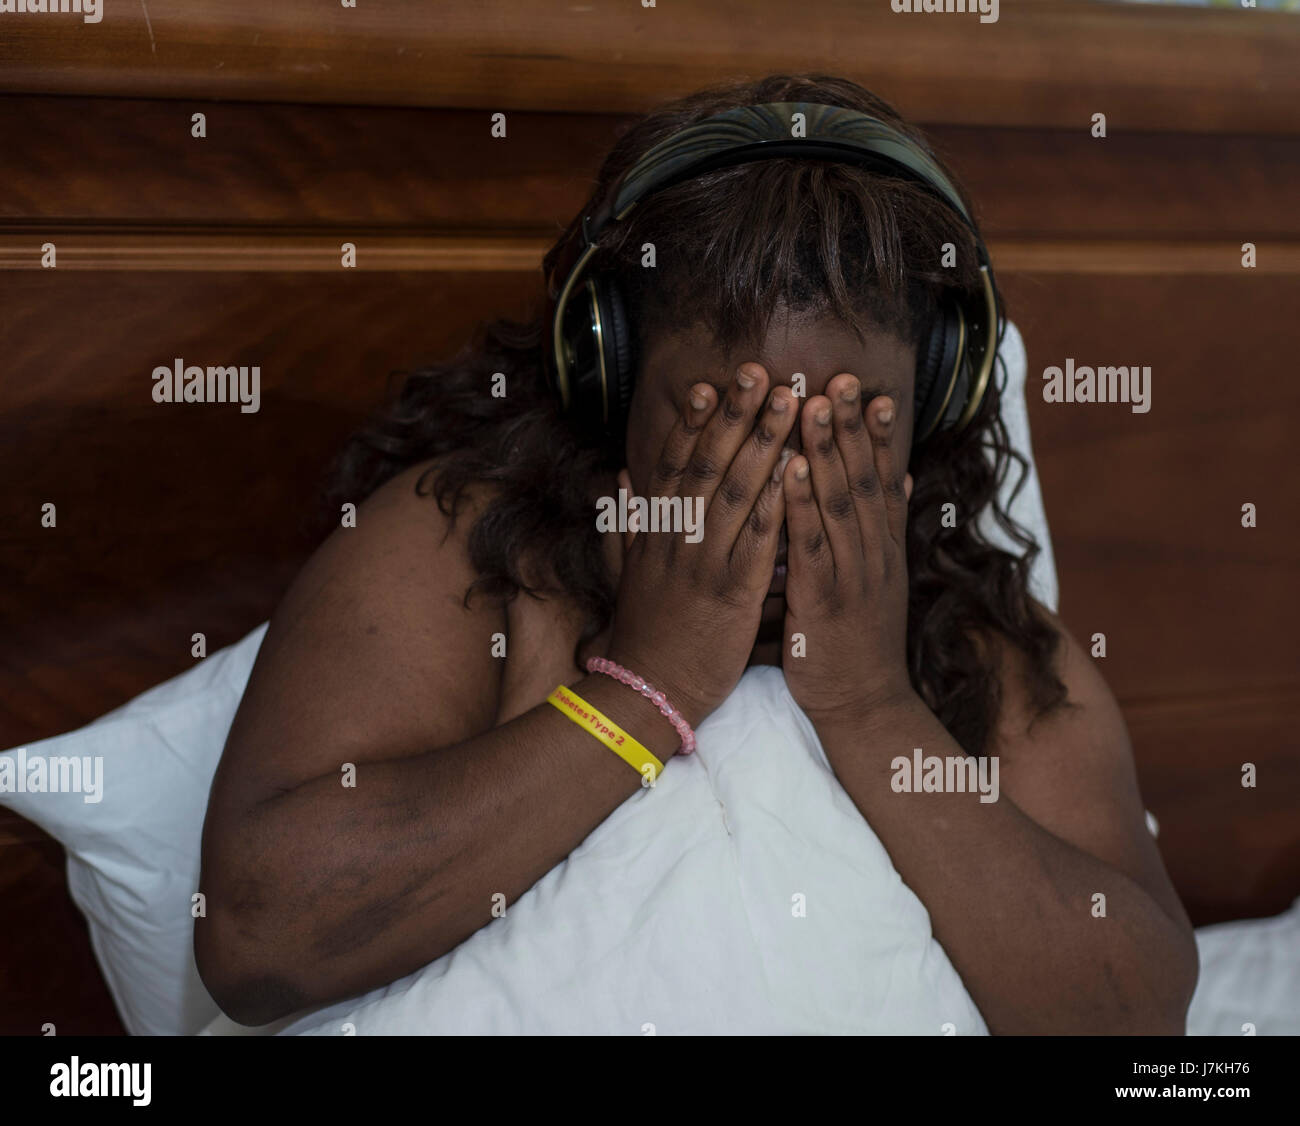 can not sleep, plus sized model with headphones, head in hands Stock Photo